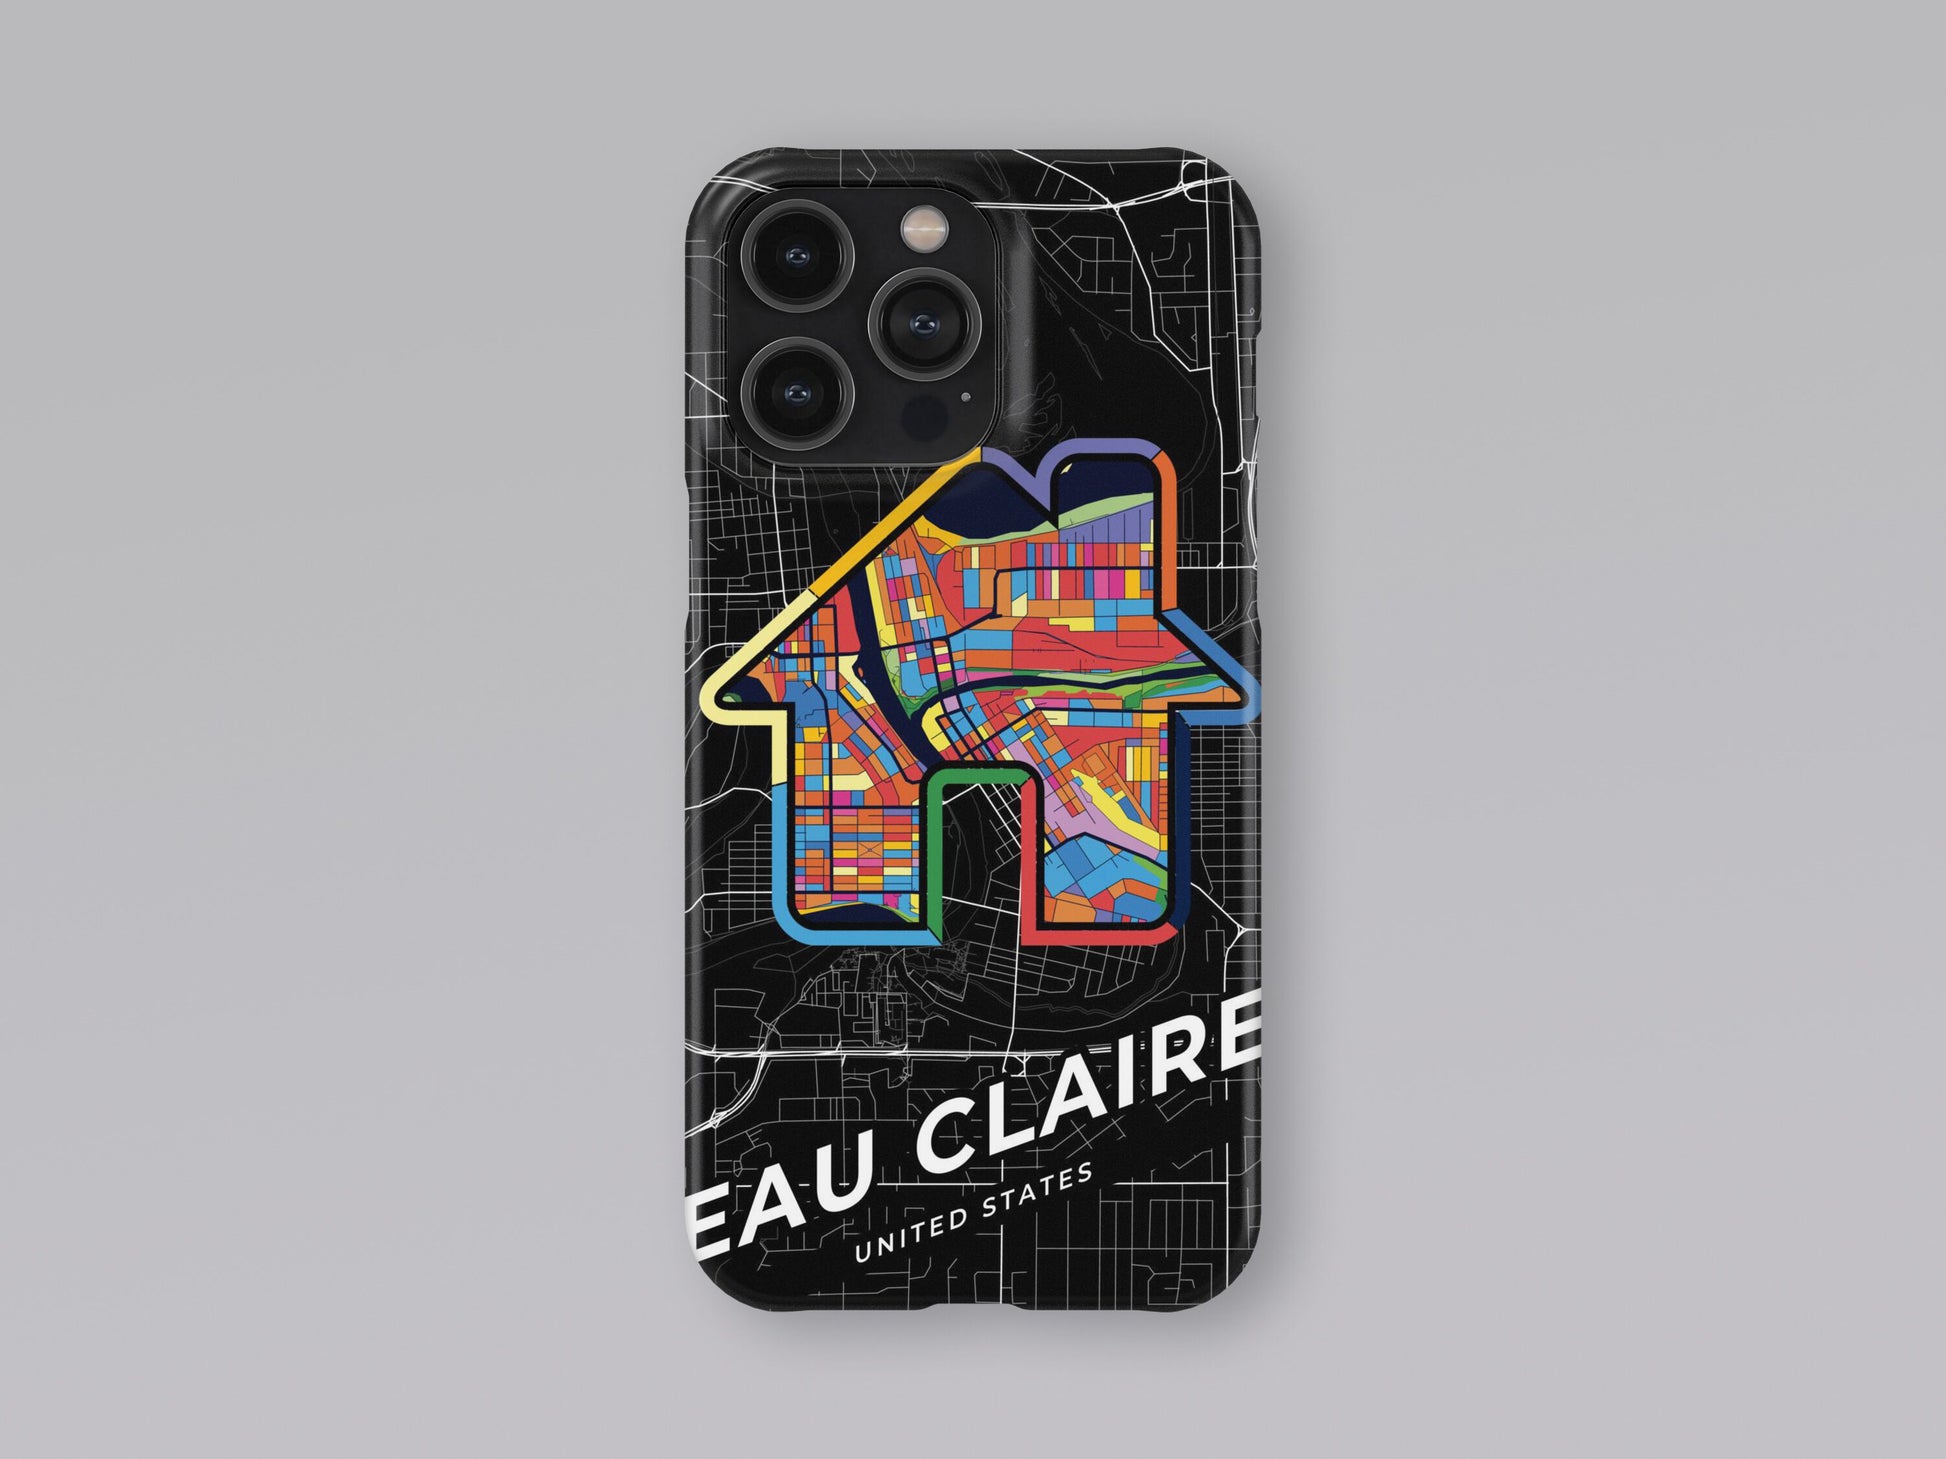 Eau Claire Wisconsin slim phone case with colorful icon. Birthday, wedding or housewarming gift. Couple match cases. 3